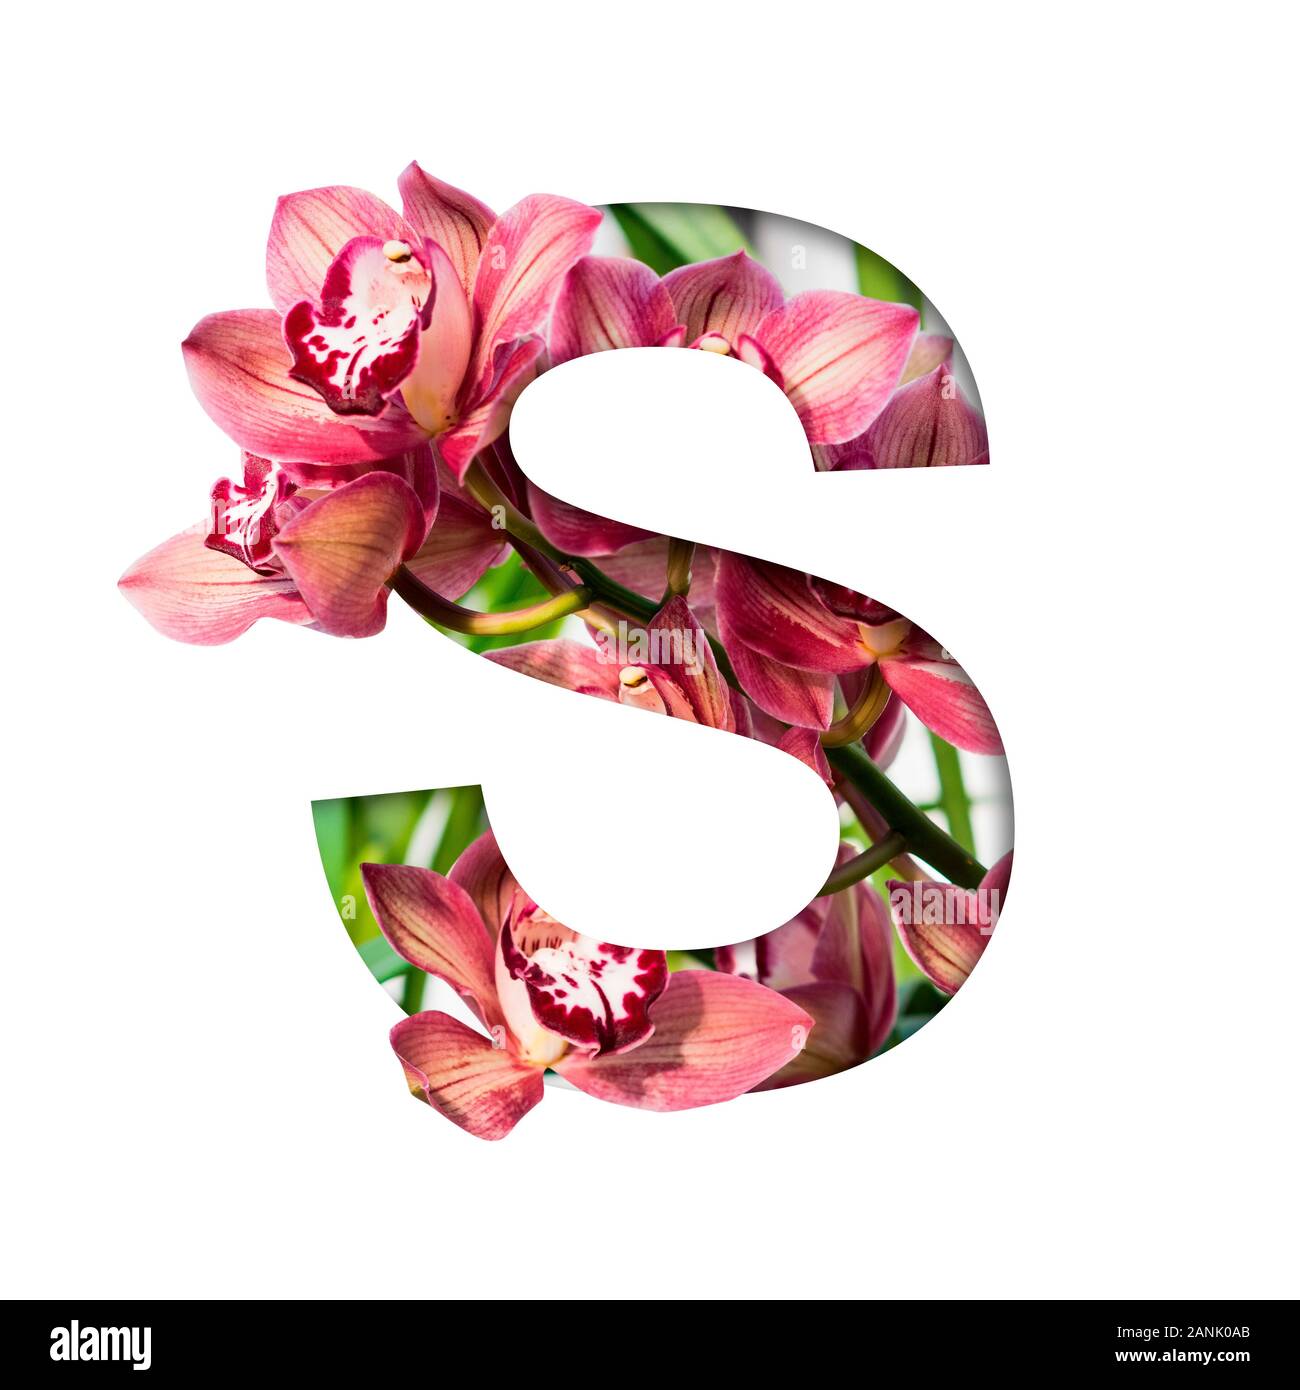 Flower font. Letter S made from natural flowers. Composition of ...